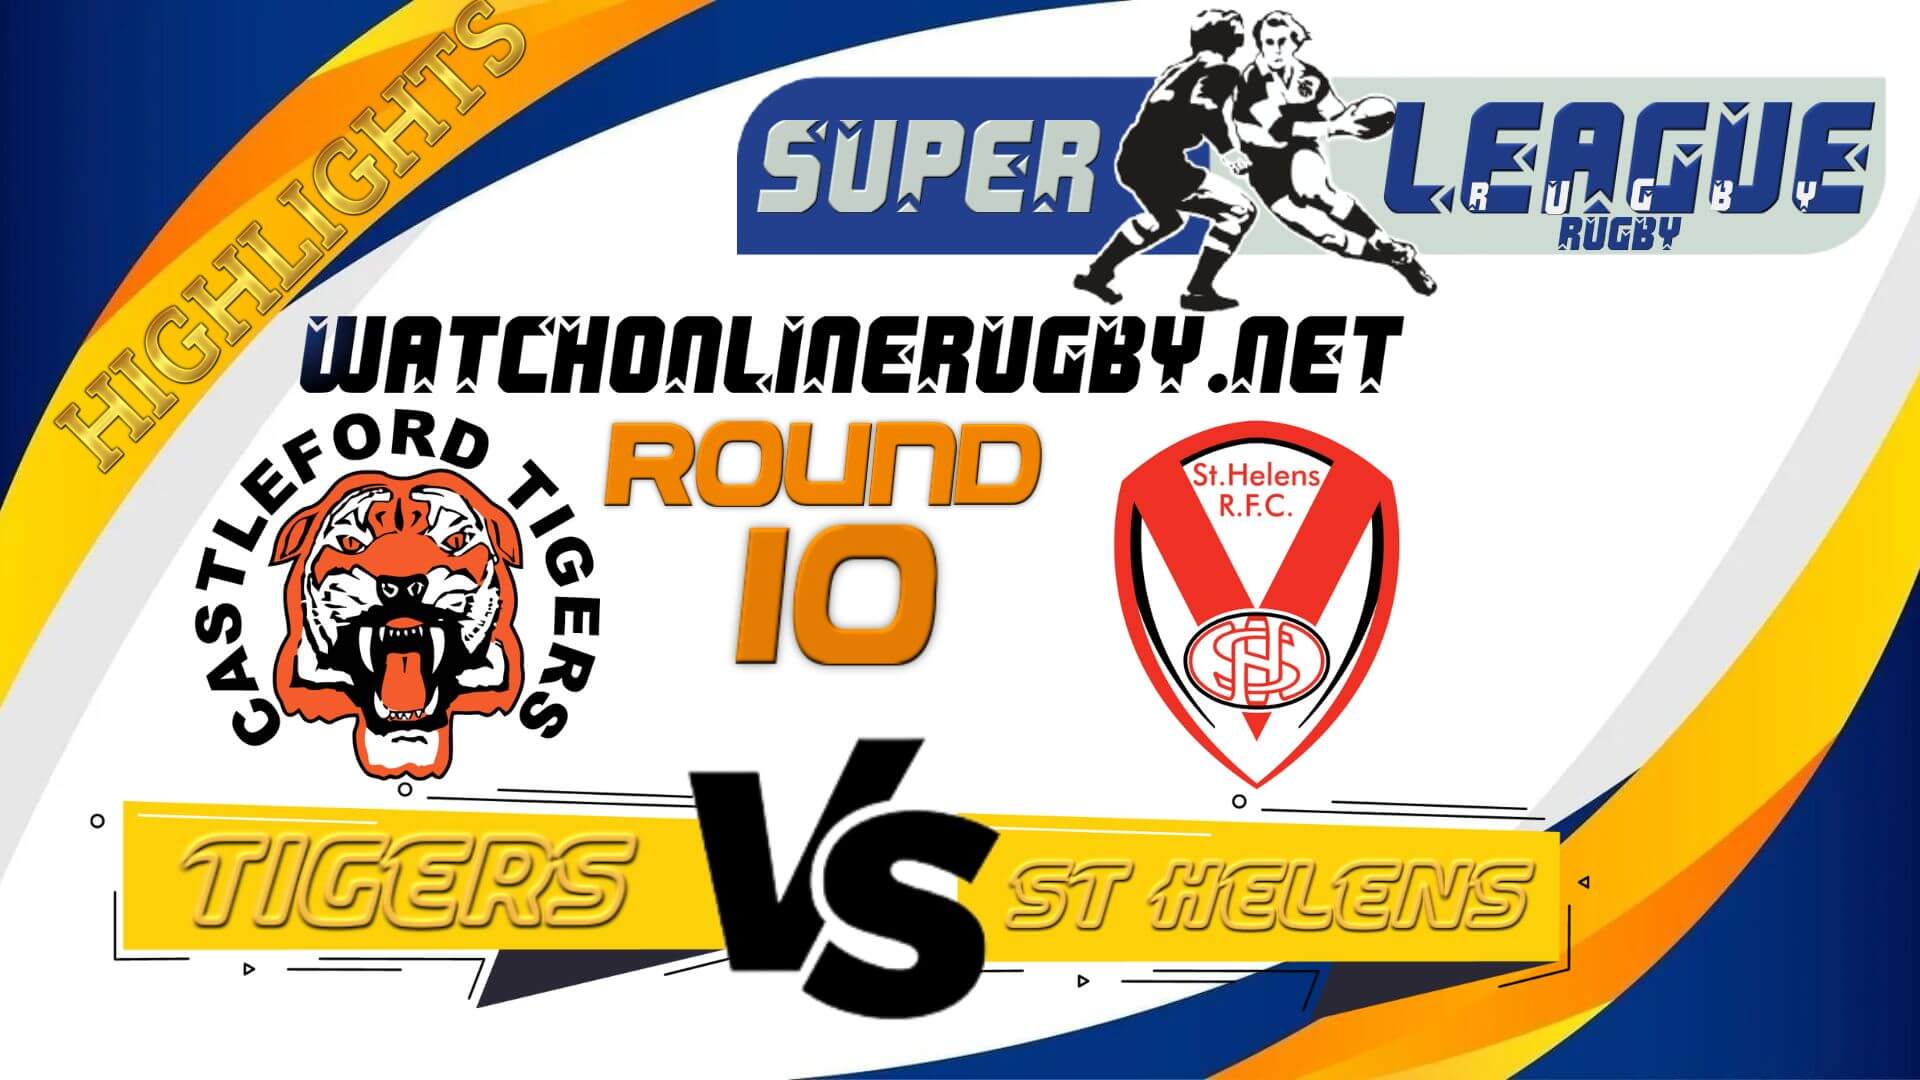 Castleford Tigers Vs St Helens Super League Rugby 2022 RD 10